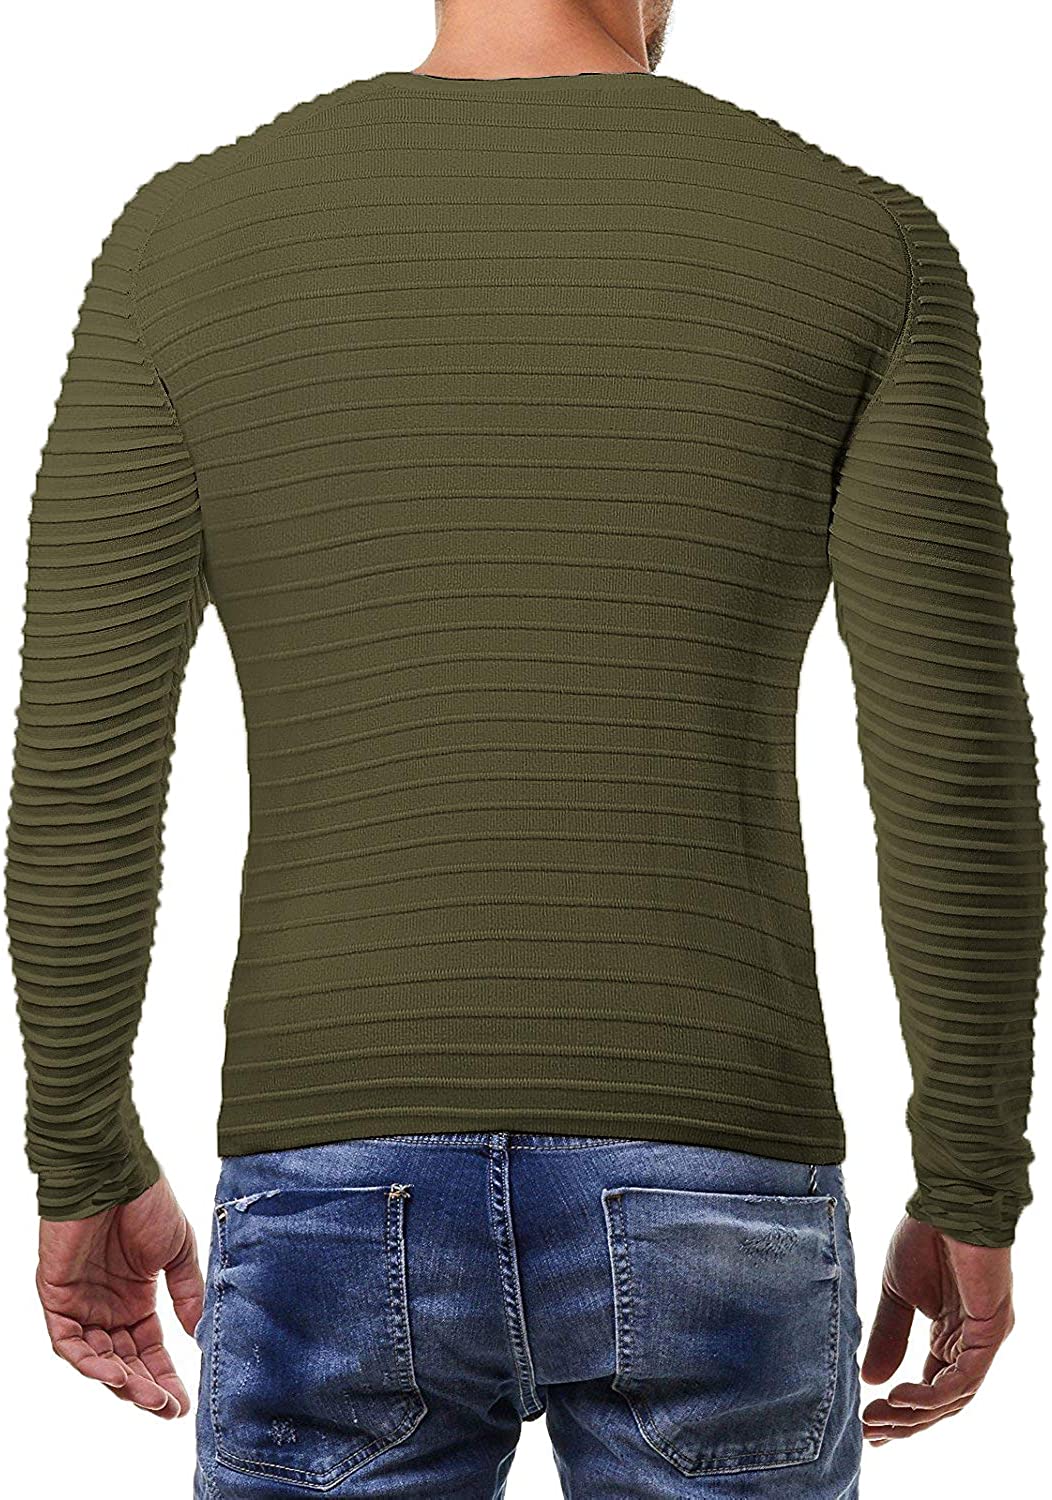 COOFANDY Men's Cable Knit Sweater Stripe Crew Neck Long Sleeve Pullover ...